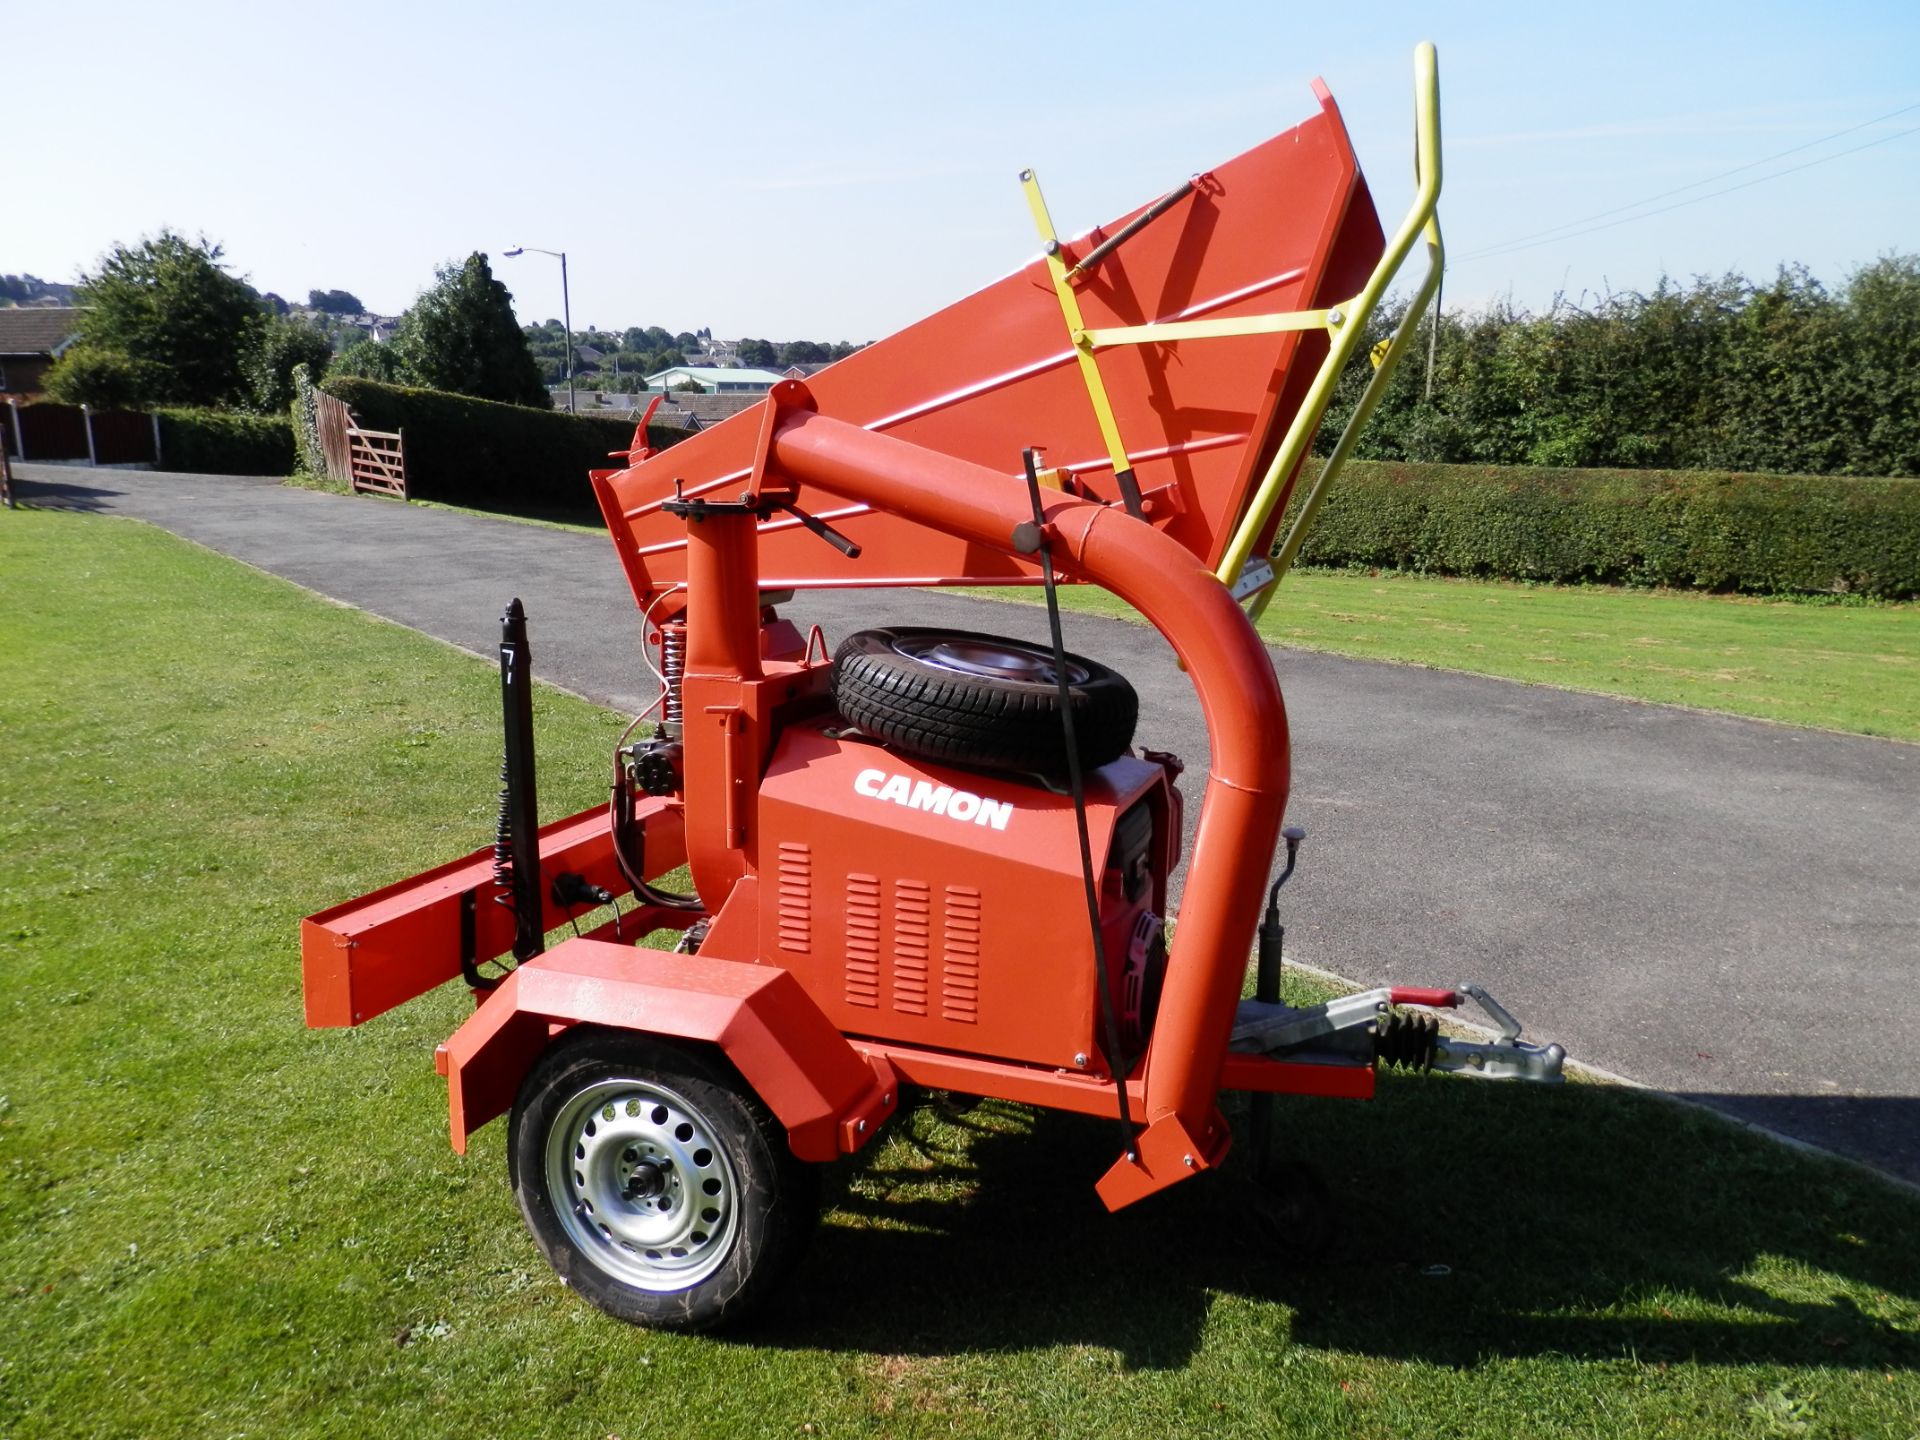 SUPERB CAMON C250P 5" PETROL POWERED WOOD CHIPPER APPROX 2007? SPARE WHEEL, WORKING WELL, NO VAT !! - Image 10 of 10